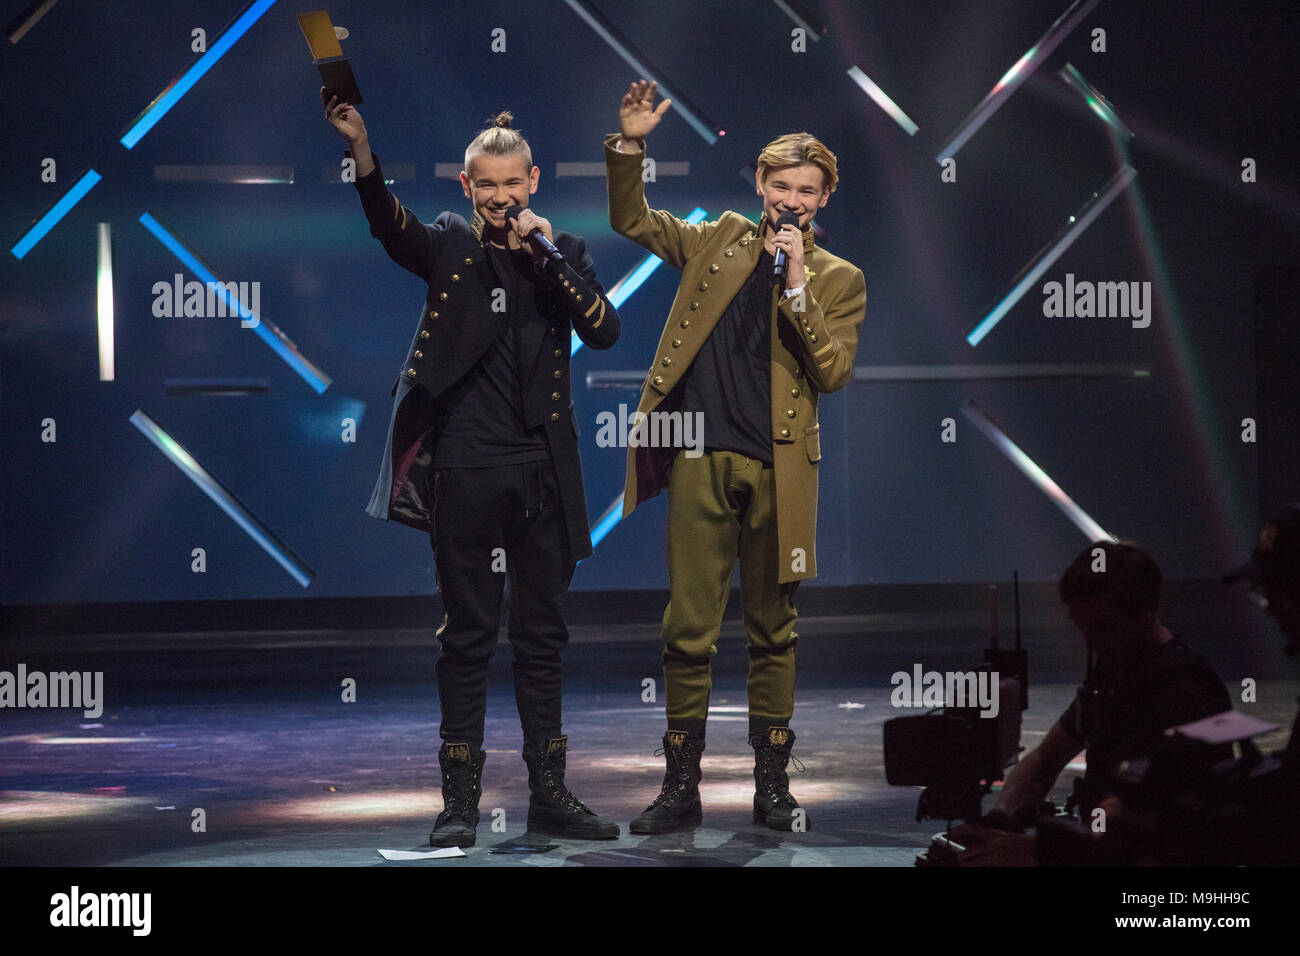 Norway, Oslo - February 25, 2018. The Norwegian pop icons and and twin brothers Marcus and Martinus present an award during the Norwegian Grammy Awards, Spellemannprisen 2017, at Oslo Konserthus in Oslo. (Photo credit: Gonzales Photo - Stian S. Moller). Stock Photo